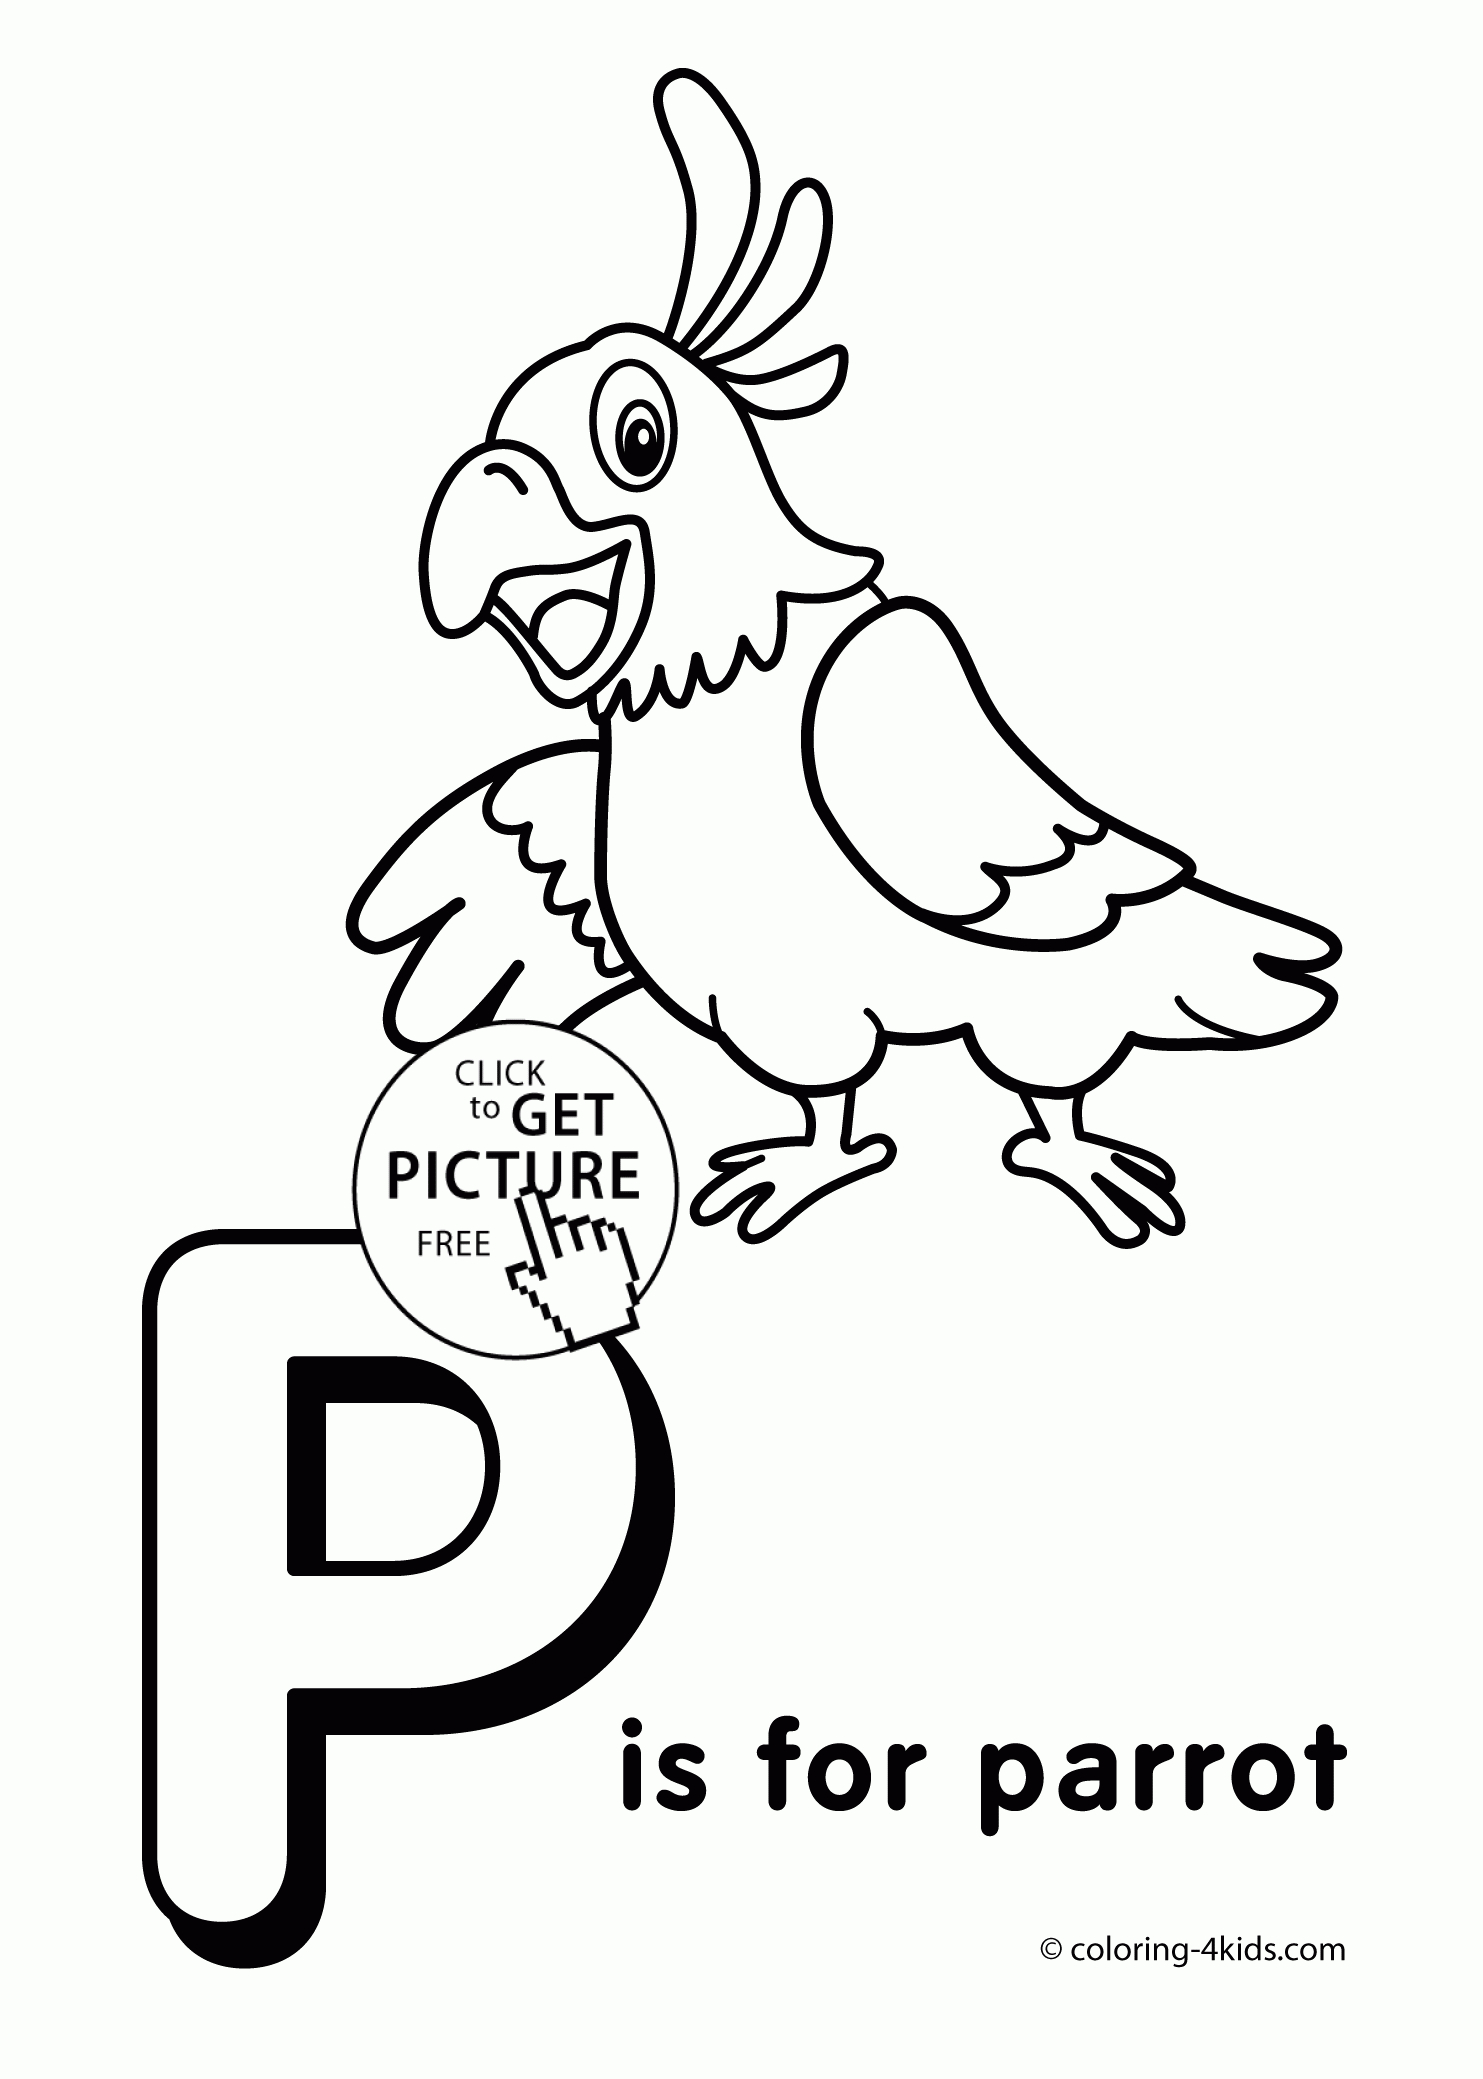 Letter P Coloring Pages Of Alphabet (P Letter Words) For Kids - Free Printable Alphabet Letters Coloring Pages